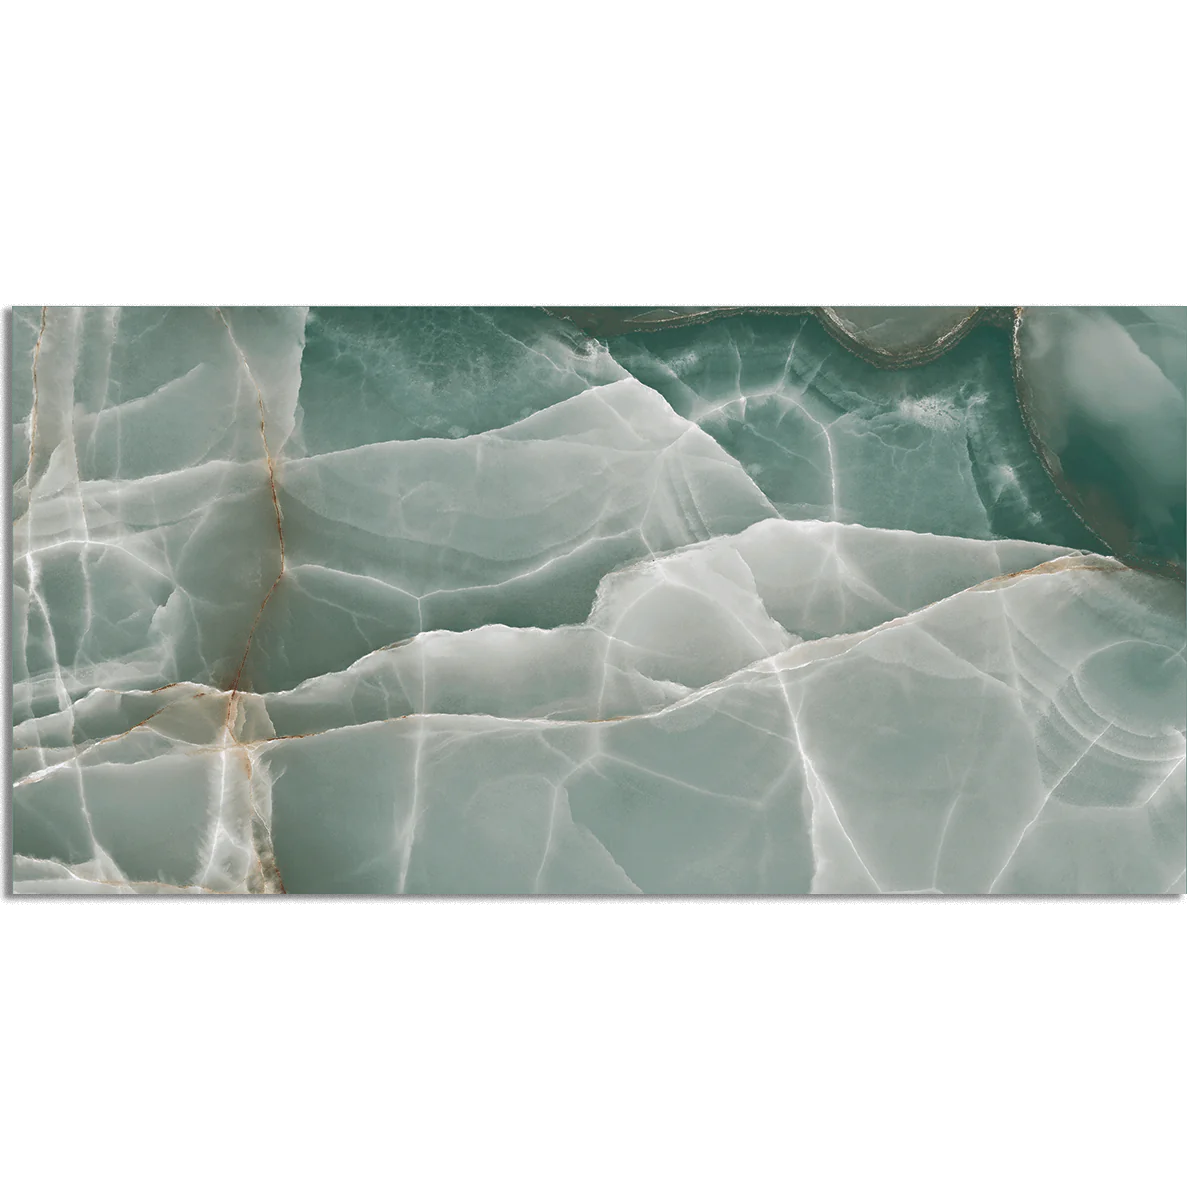 Ocean Large Emerald Polished Turquoise Green Marble Polished Wall And Floor Porcelain Tiles 60cmx120cm